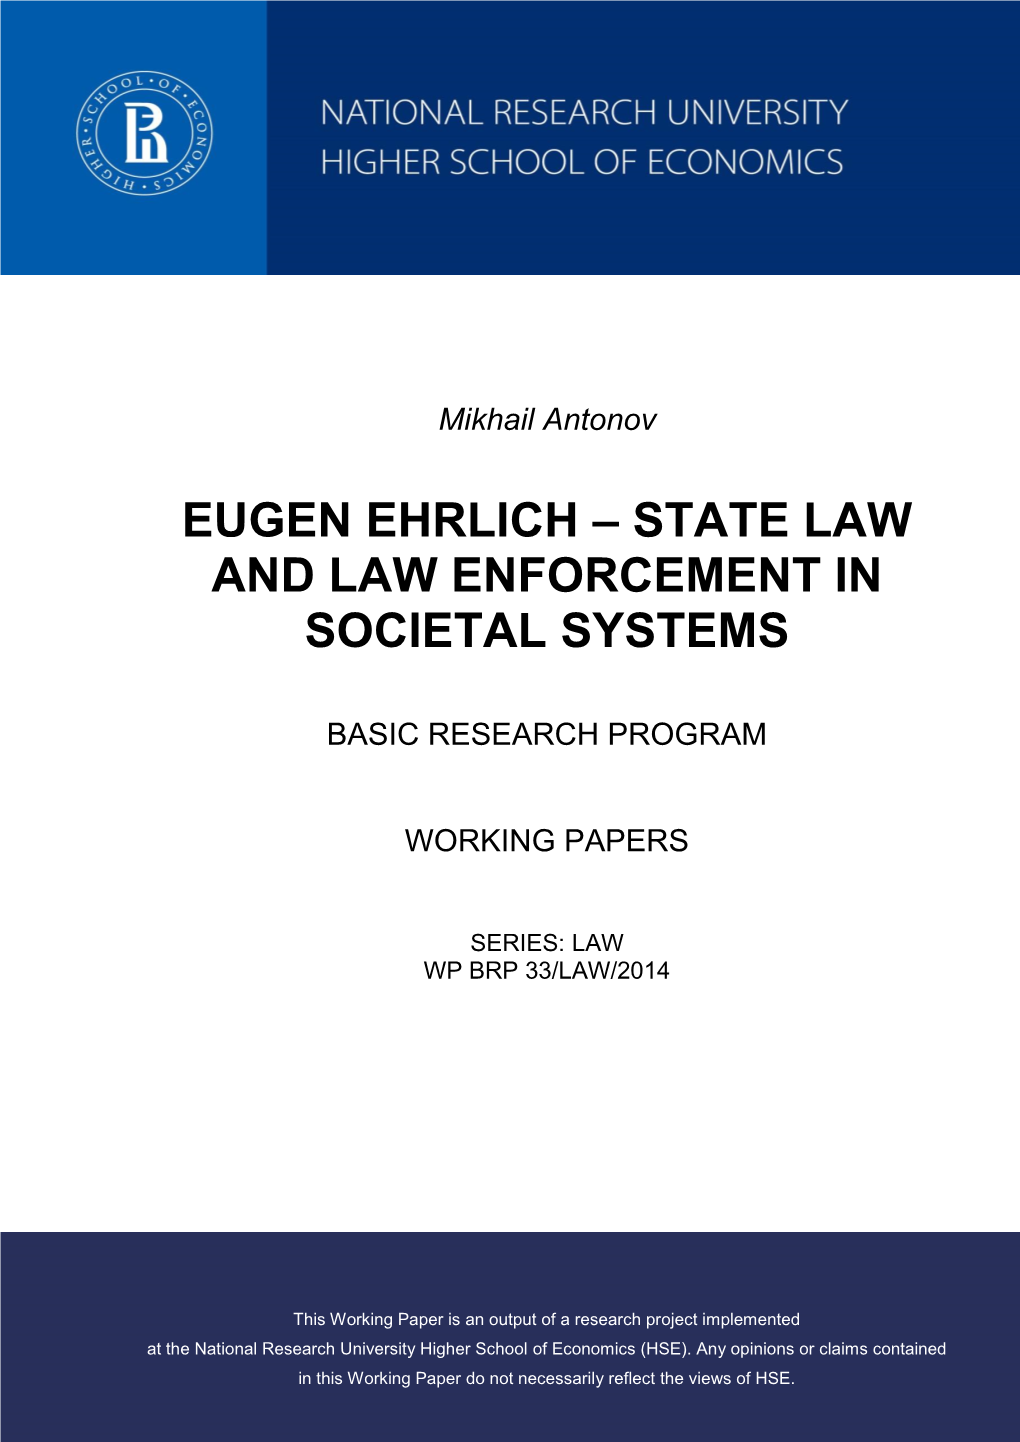 Eugen Ehrlich – State Law and Law Enforcement in Societal Systems